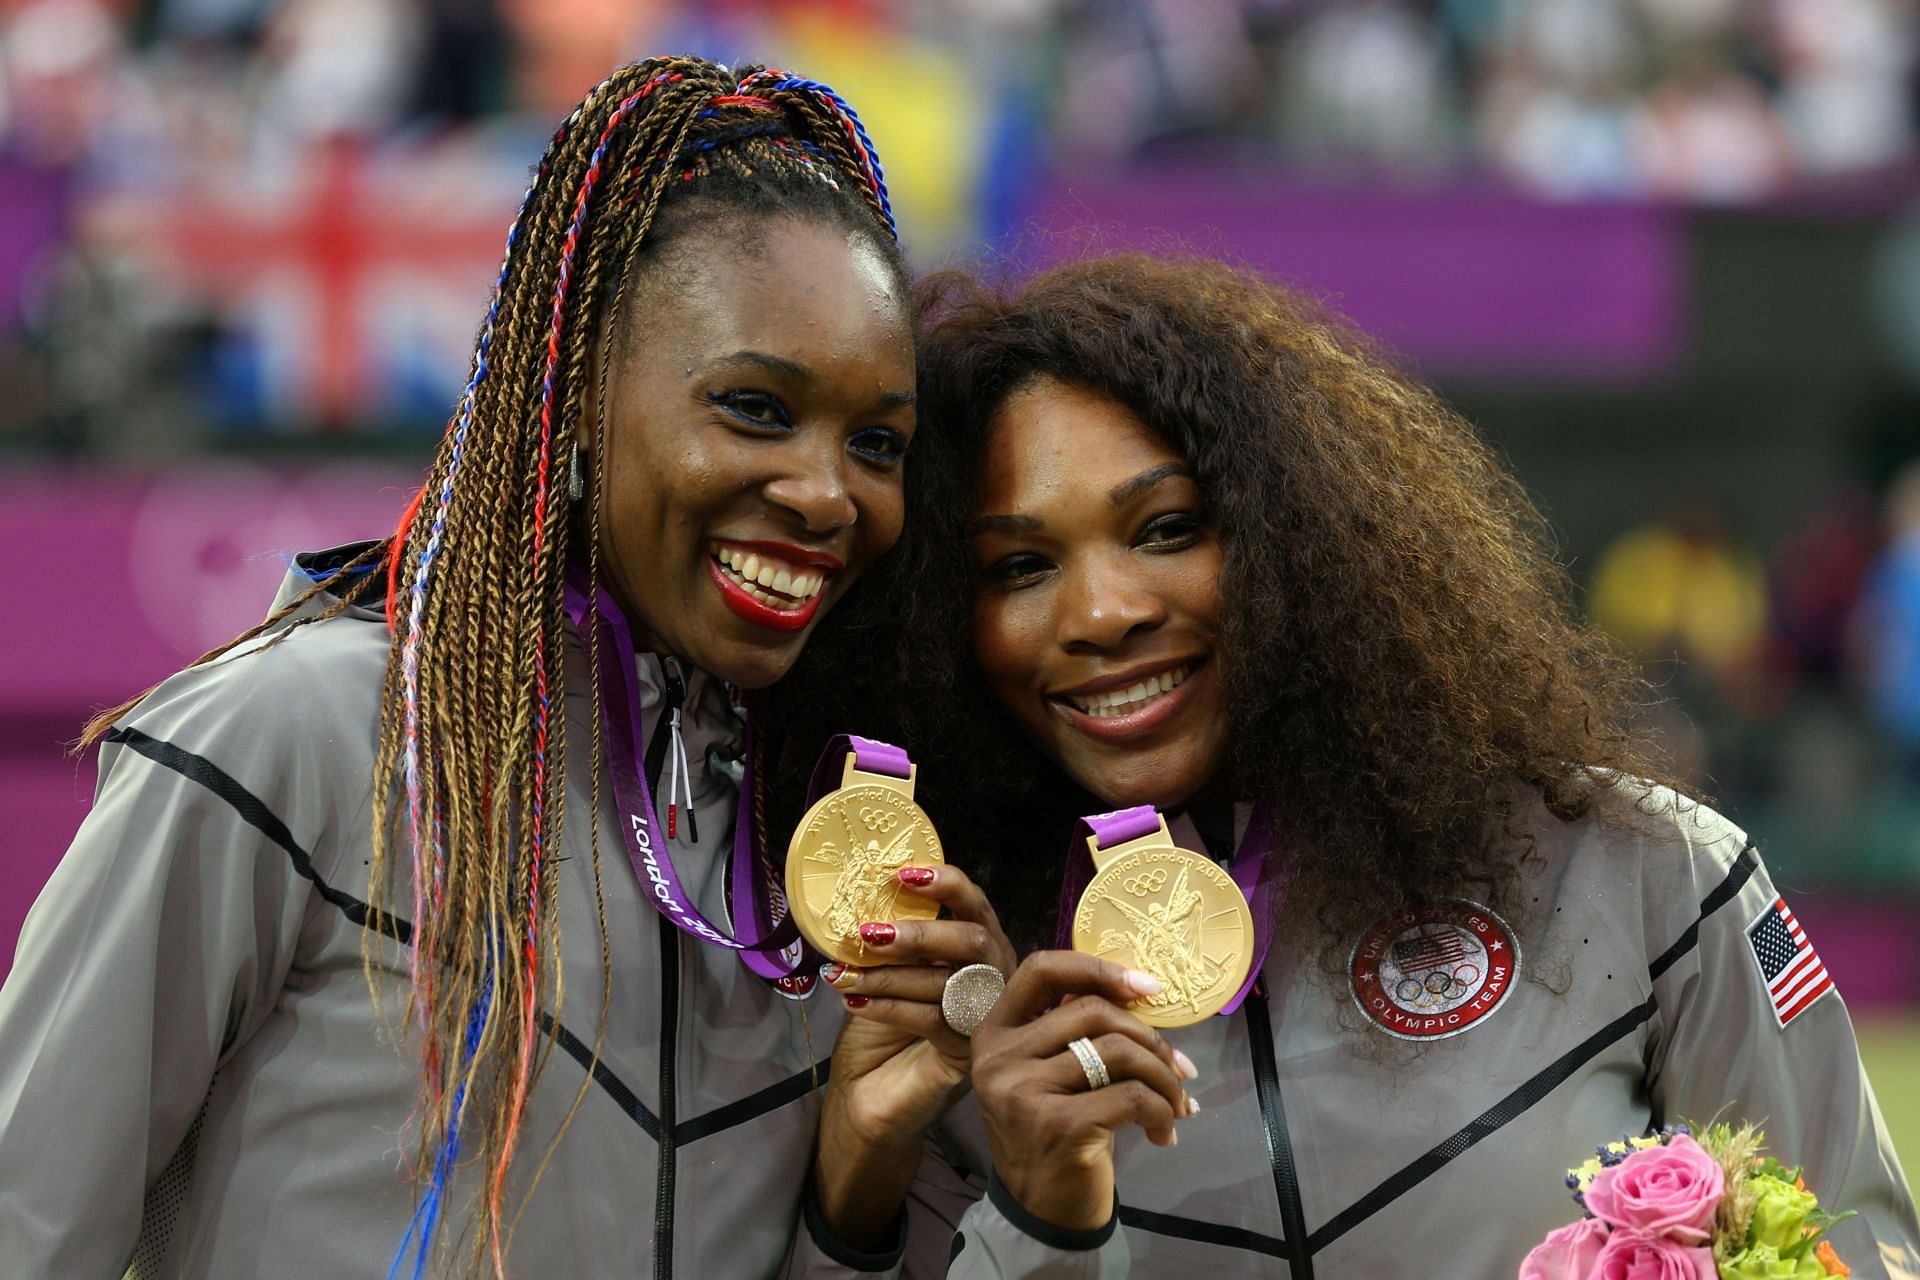 Venus and Serena Williams won gold in the doubles category at the London Olympics